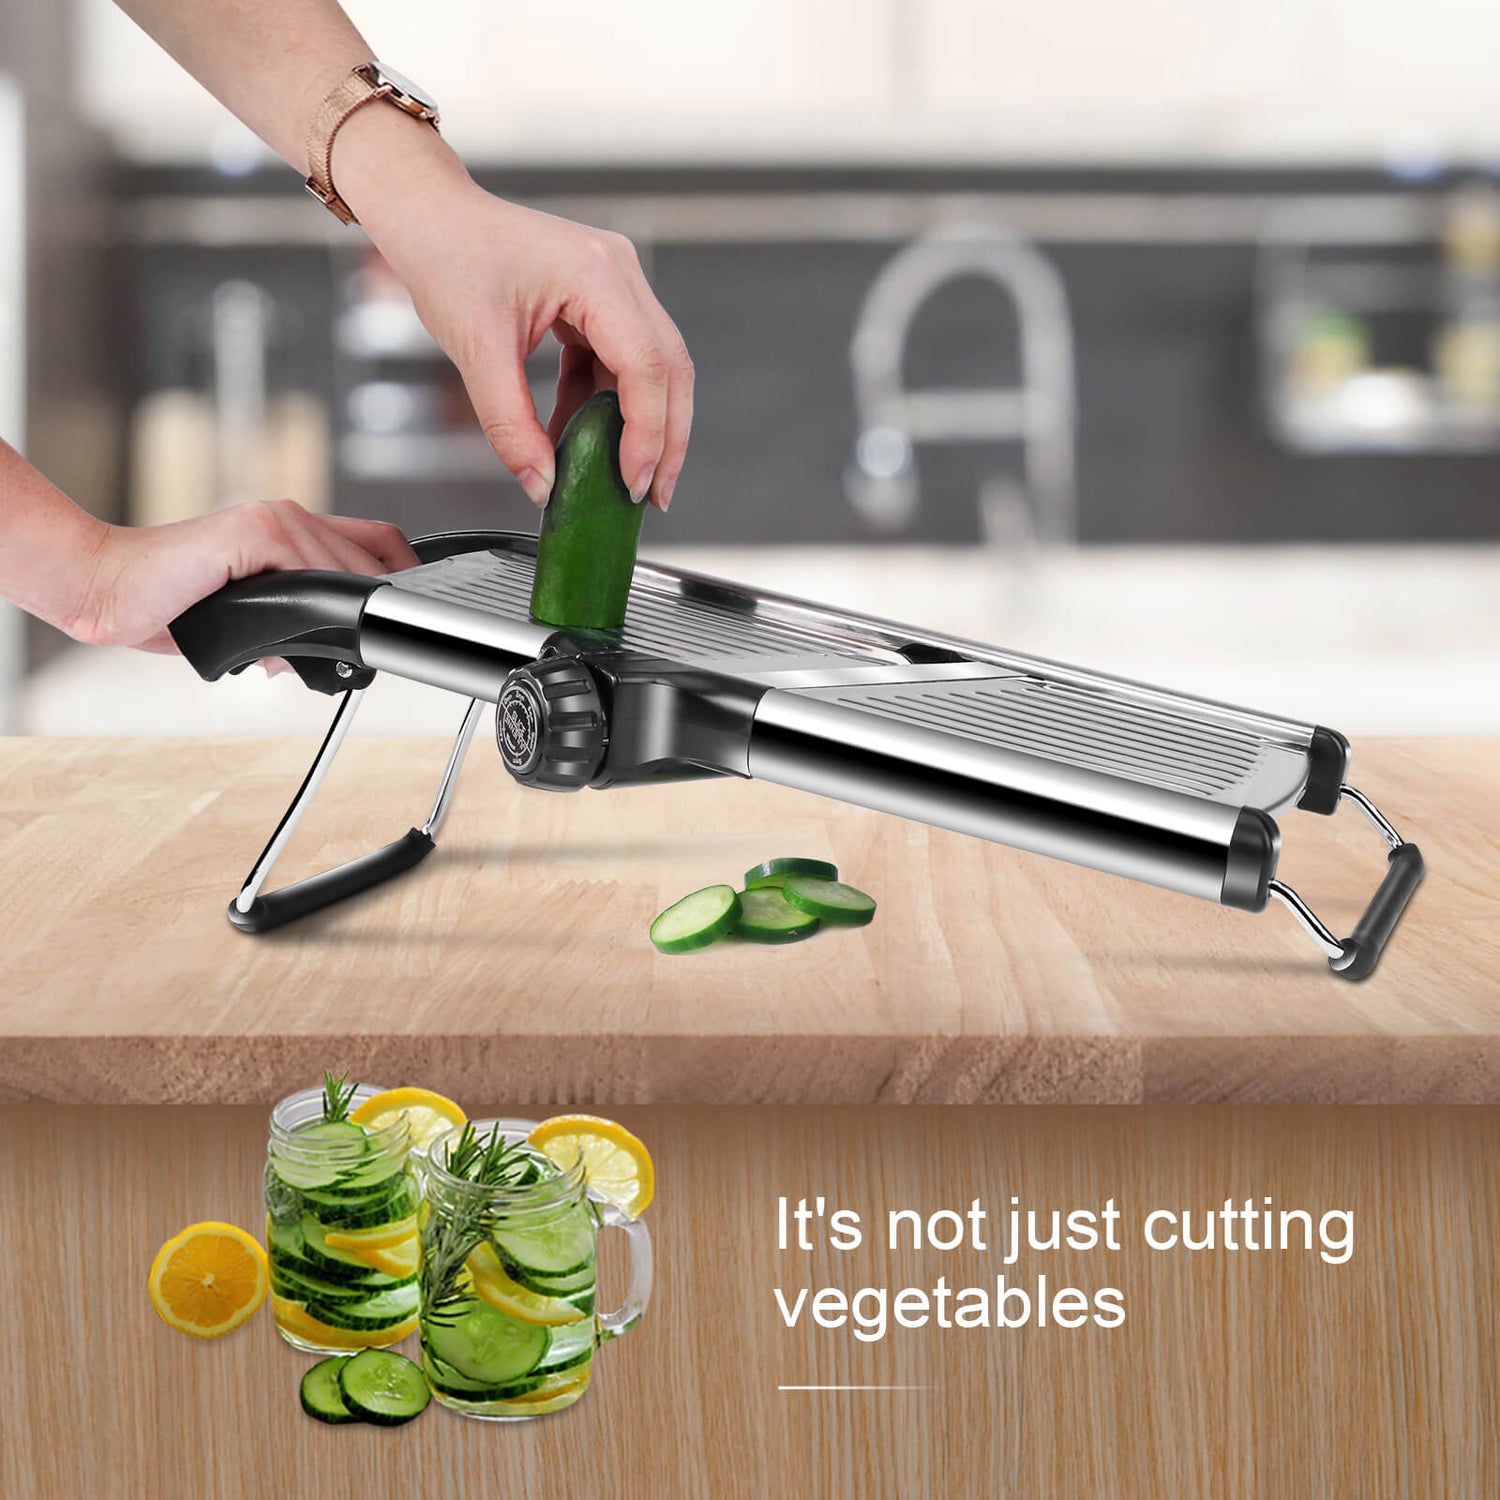 Masthome Vegetables Stainless Steel Food Cutter